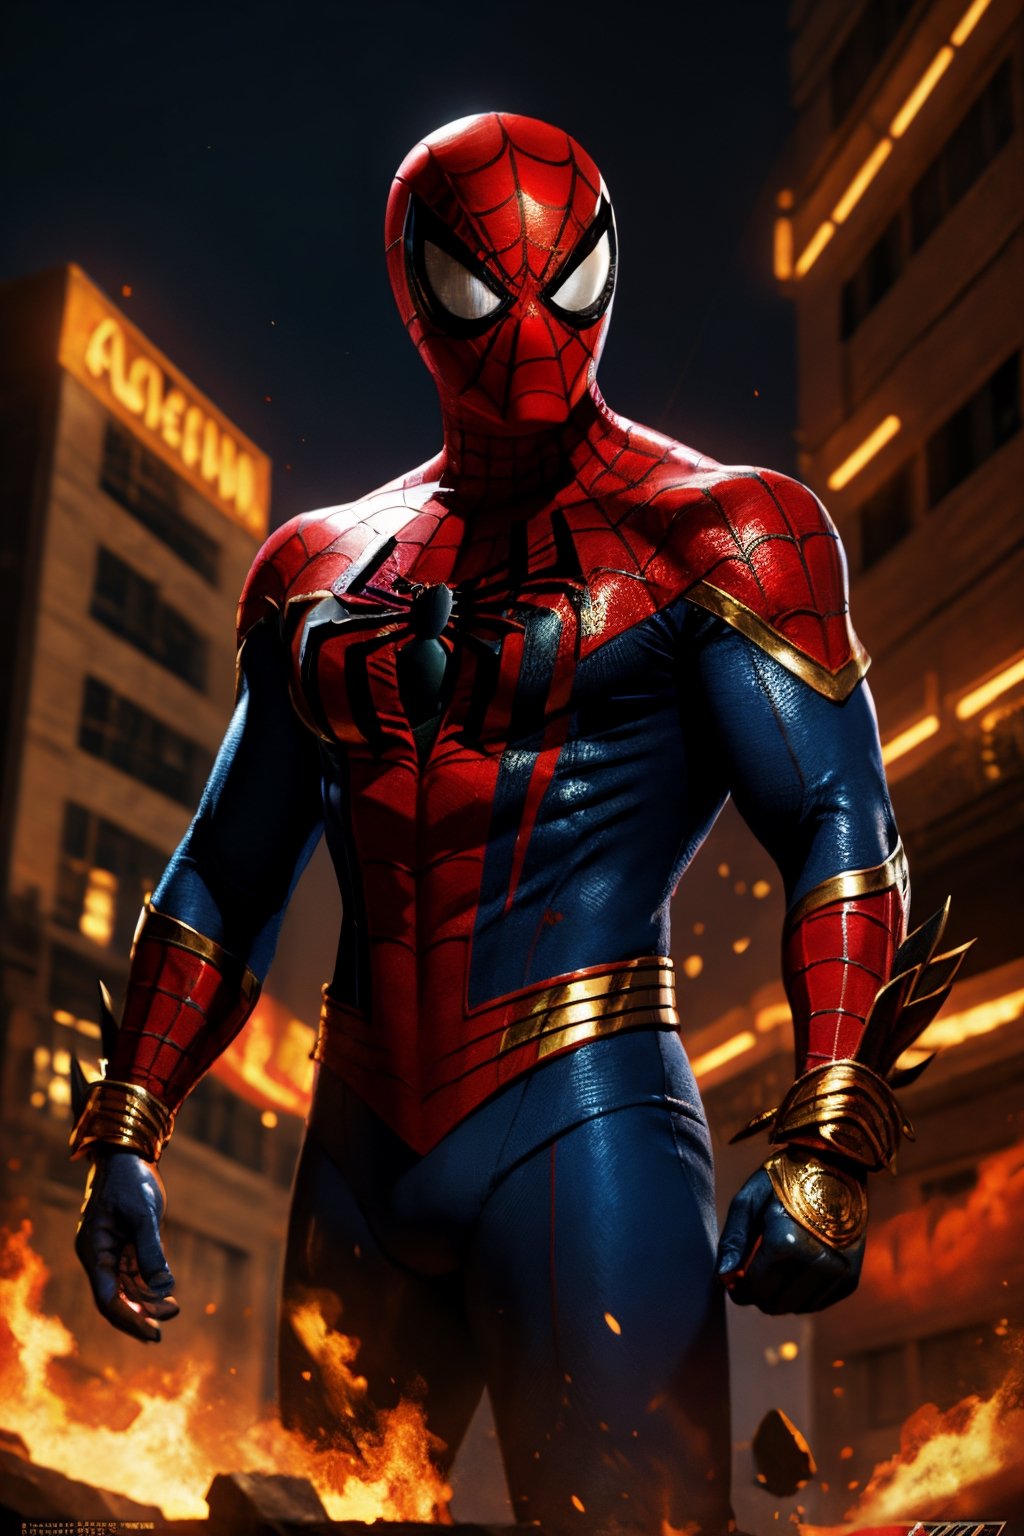 aztecian spiderman action pose, vector, aztecian style culture ornament, masked spiderman, contour, painting, realistic, poster, 3d render,vibrant, hyperdetailed, microdetailed, masterpiece art, ultra hd quality, 4k, vibrant, conceptual art, illustration, unzoomed,Leonardo Style,vector art,perfecteyes,High detailed ,EpicSky